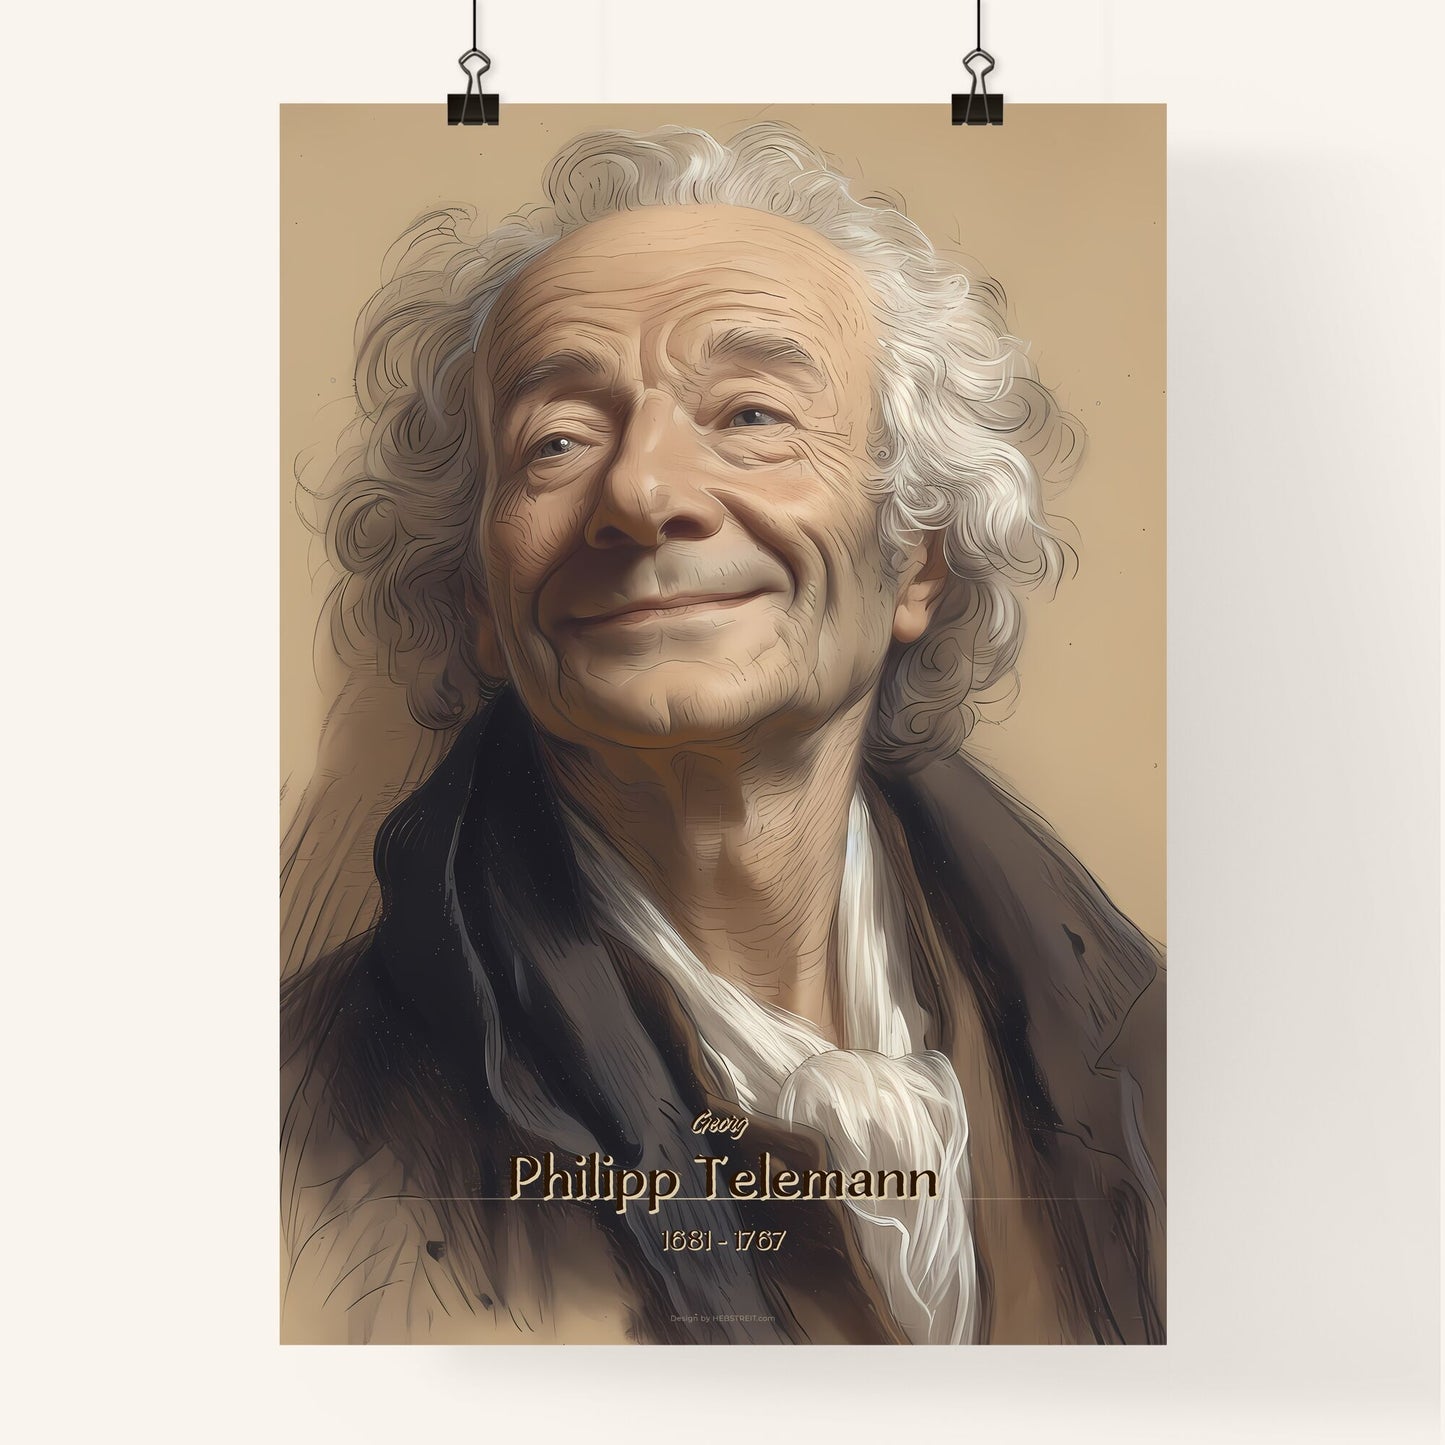 Georg, Philipp Telemann, 1681 - 1767, A Poster of a man with white hair and a scarf Default Title